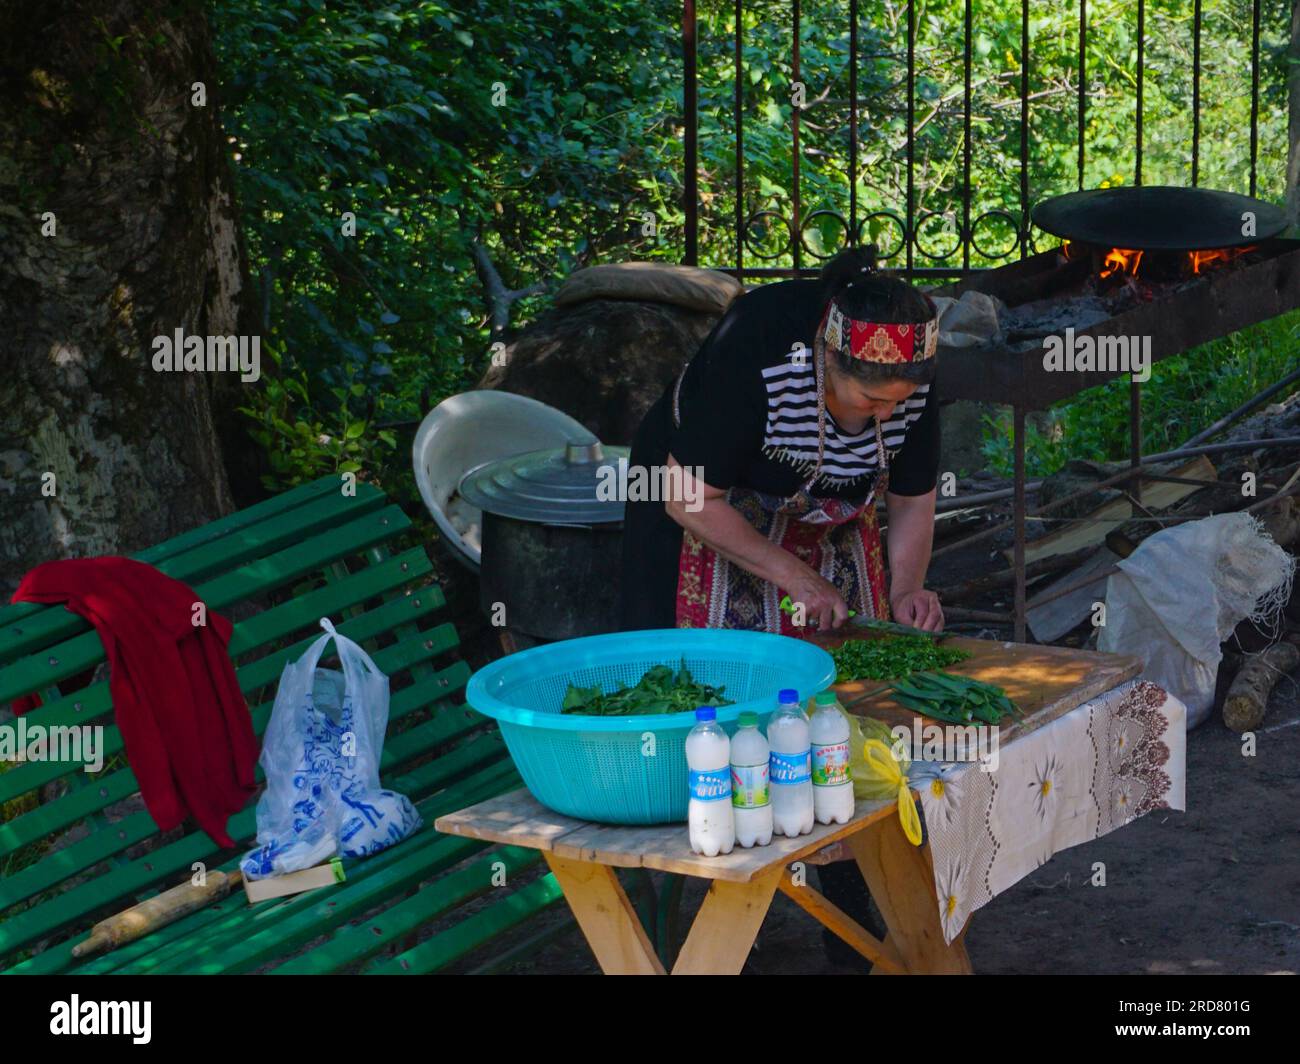 A lady seen preparing food outside Dadivank, an Armenian Apostolic monastery, in Kalbajar, Nagorno-Karabakh. The unrecognised yet de facto independent country in South Caucasus, Nagorno-Karabakh (also known as Artsakh) has been in the longest-running territorial dispute between Azerbaijan and Armenia in post-Soviet Eurasia since the collapse of Soviet Union. It is mainly populated by ethnic Armenians. Stock Photo